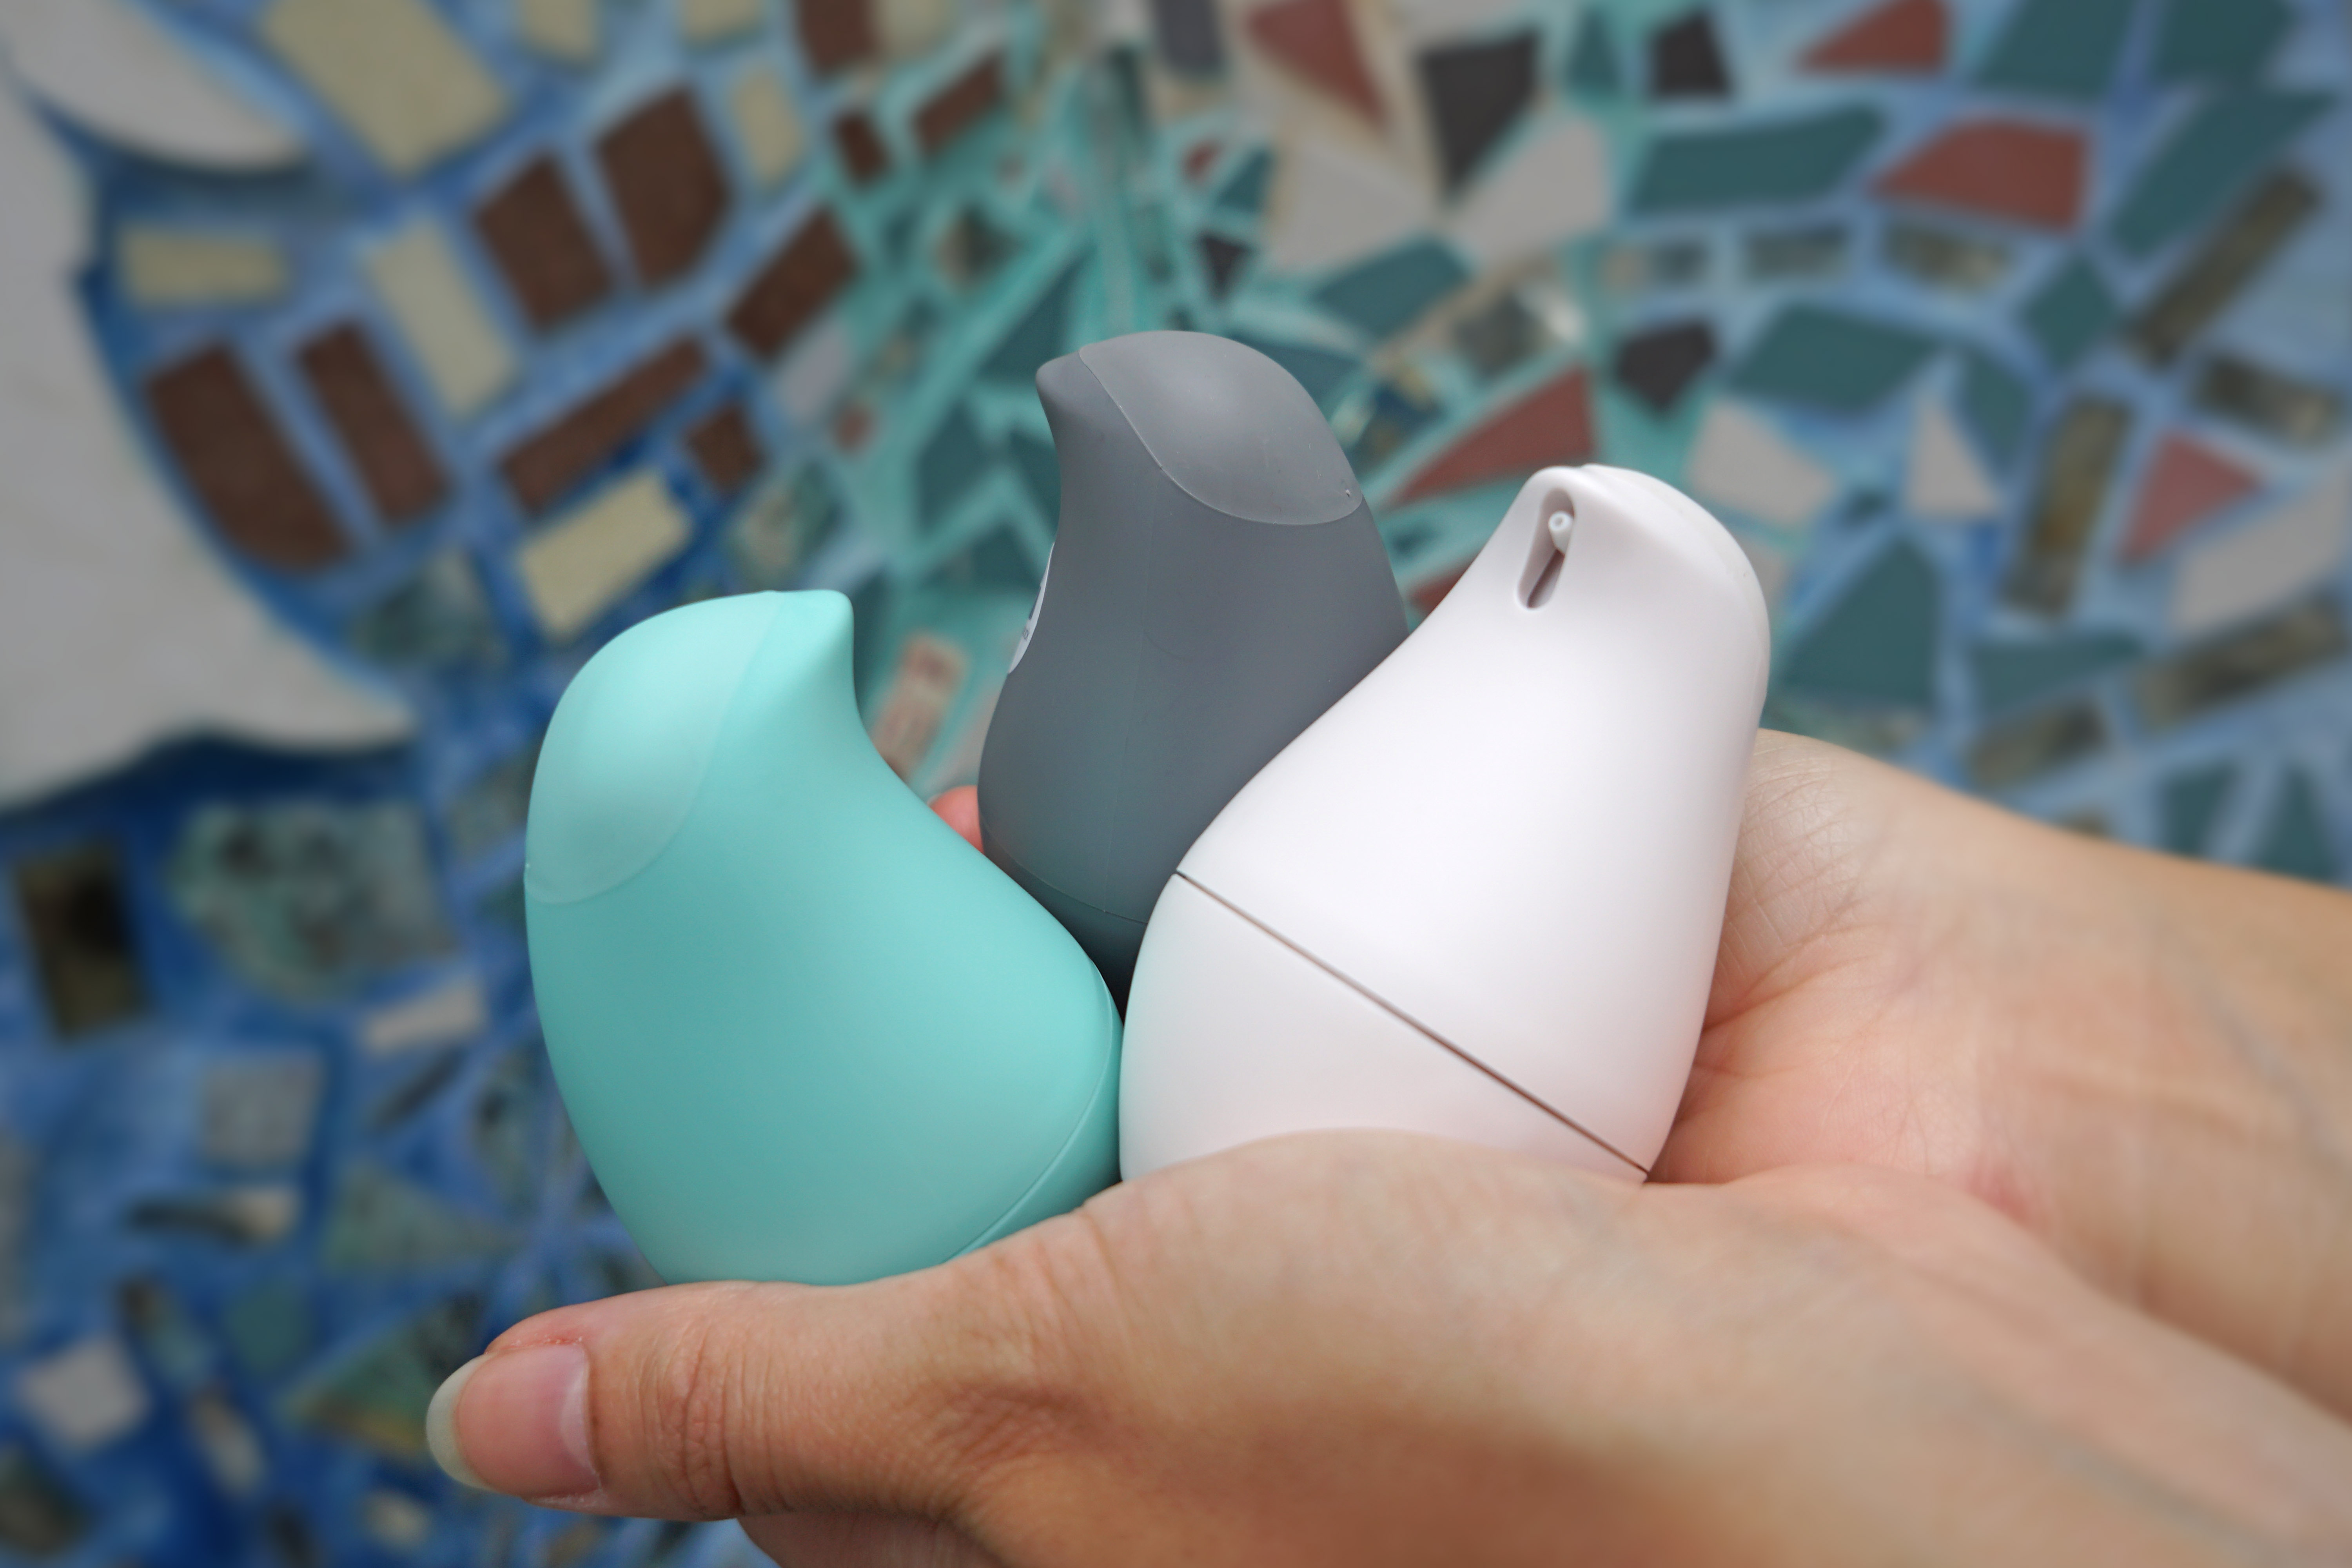 Holding all three colors of Olika Birdie hand sanitizers: blue, grey and white with mosaic background